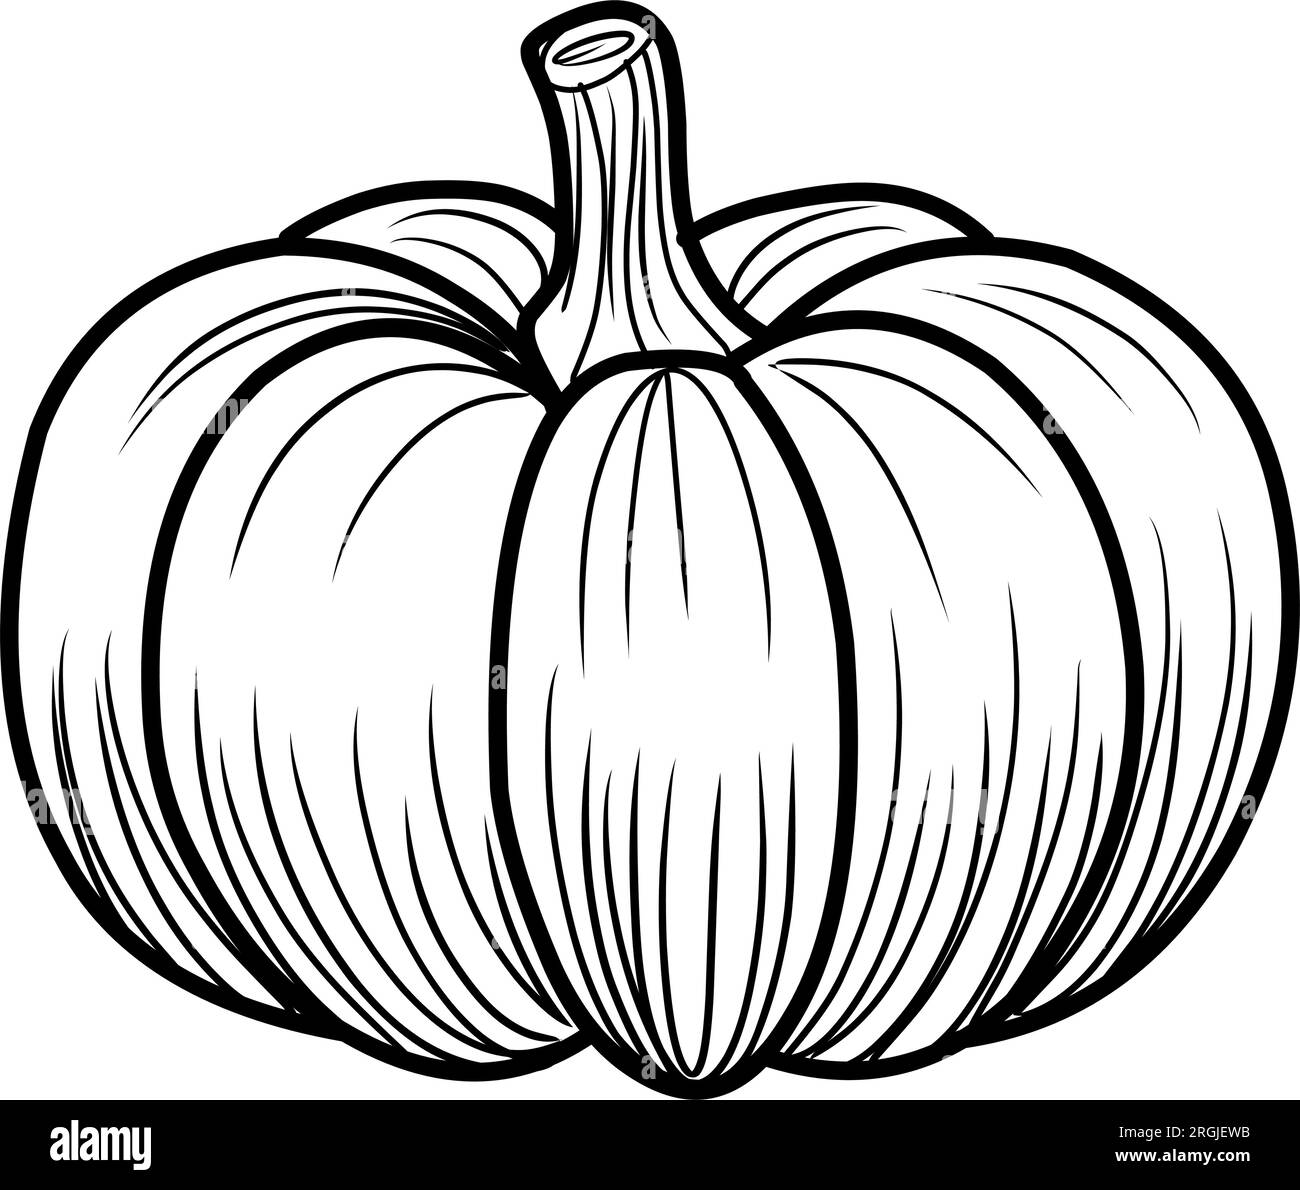 Coloring pagepumpkinautumn halloween thanksgiving day coloring book black and white linear illustration stock vector image art